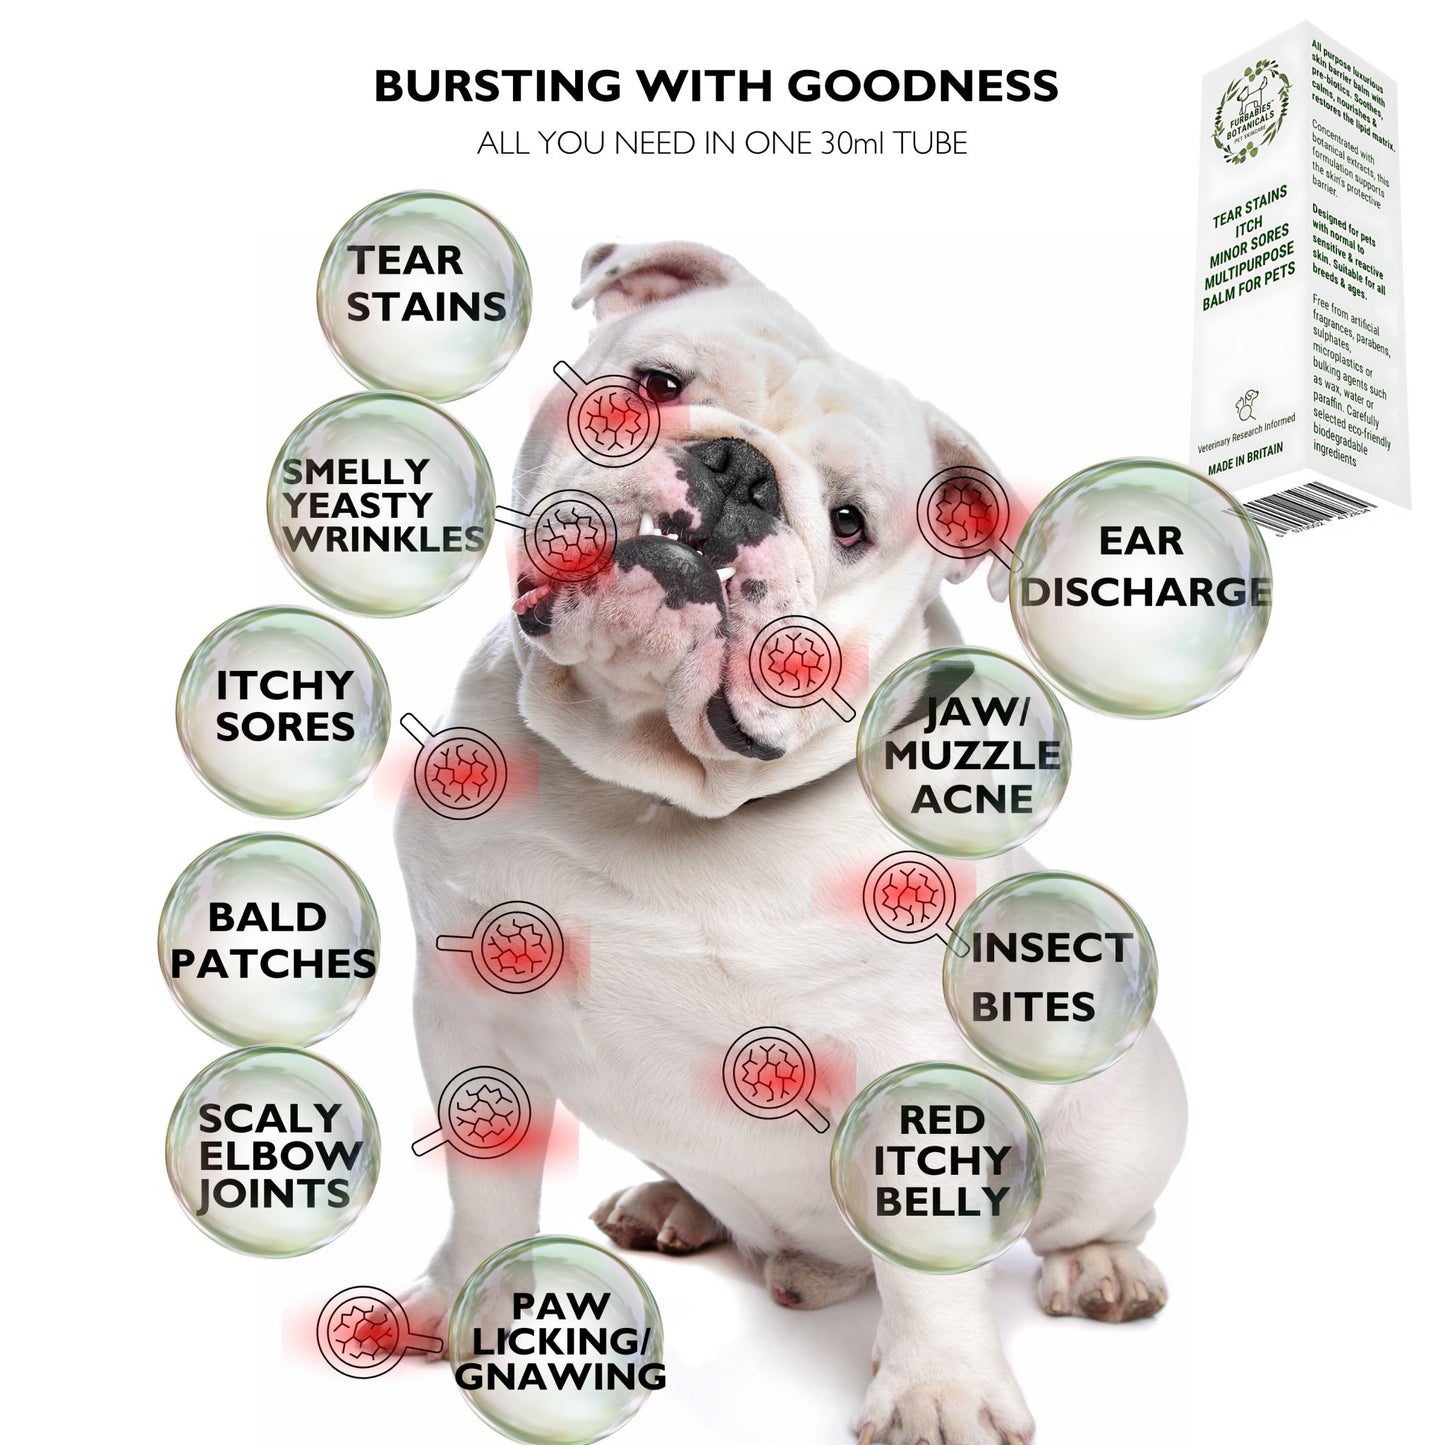 Itchy Paws, Cracked Nose, Tear Stains, Coat Itch, Minor Sores, Paw licking Multipurpose Natural Balm for Dogs & Cats - PET SKINCARE FOR ITCH, PAW LICKING, TEAR STAINS & MORE